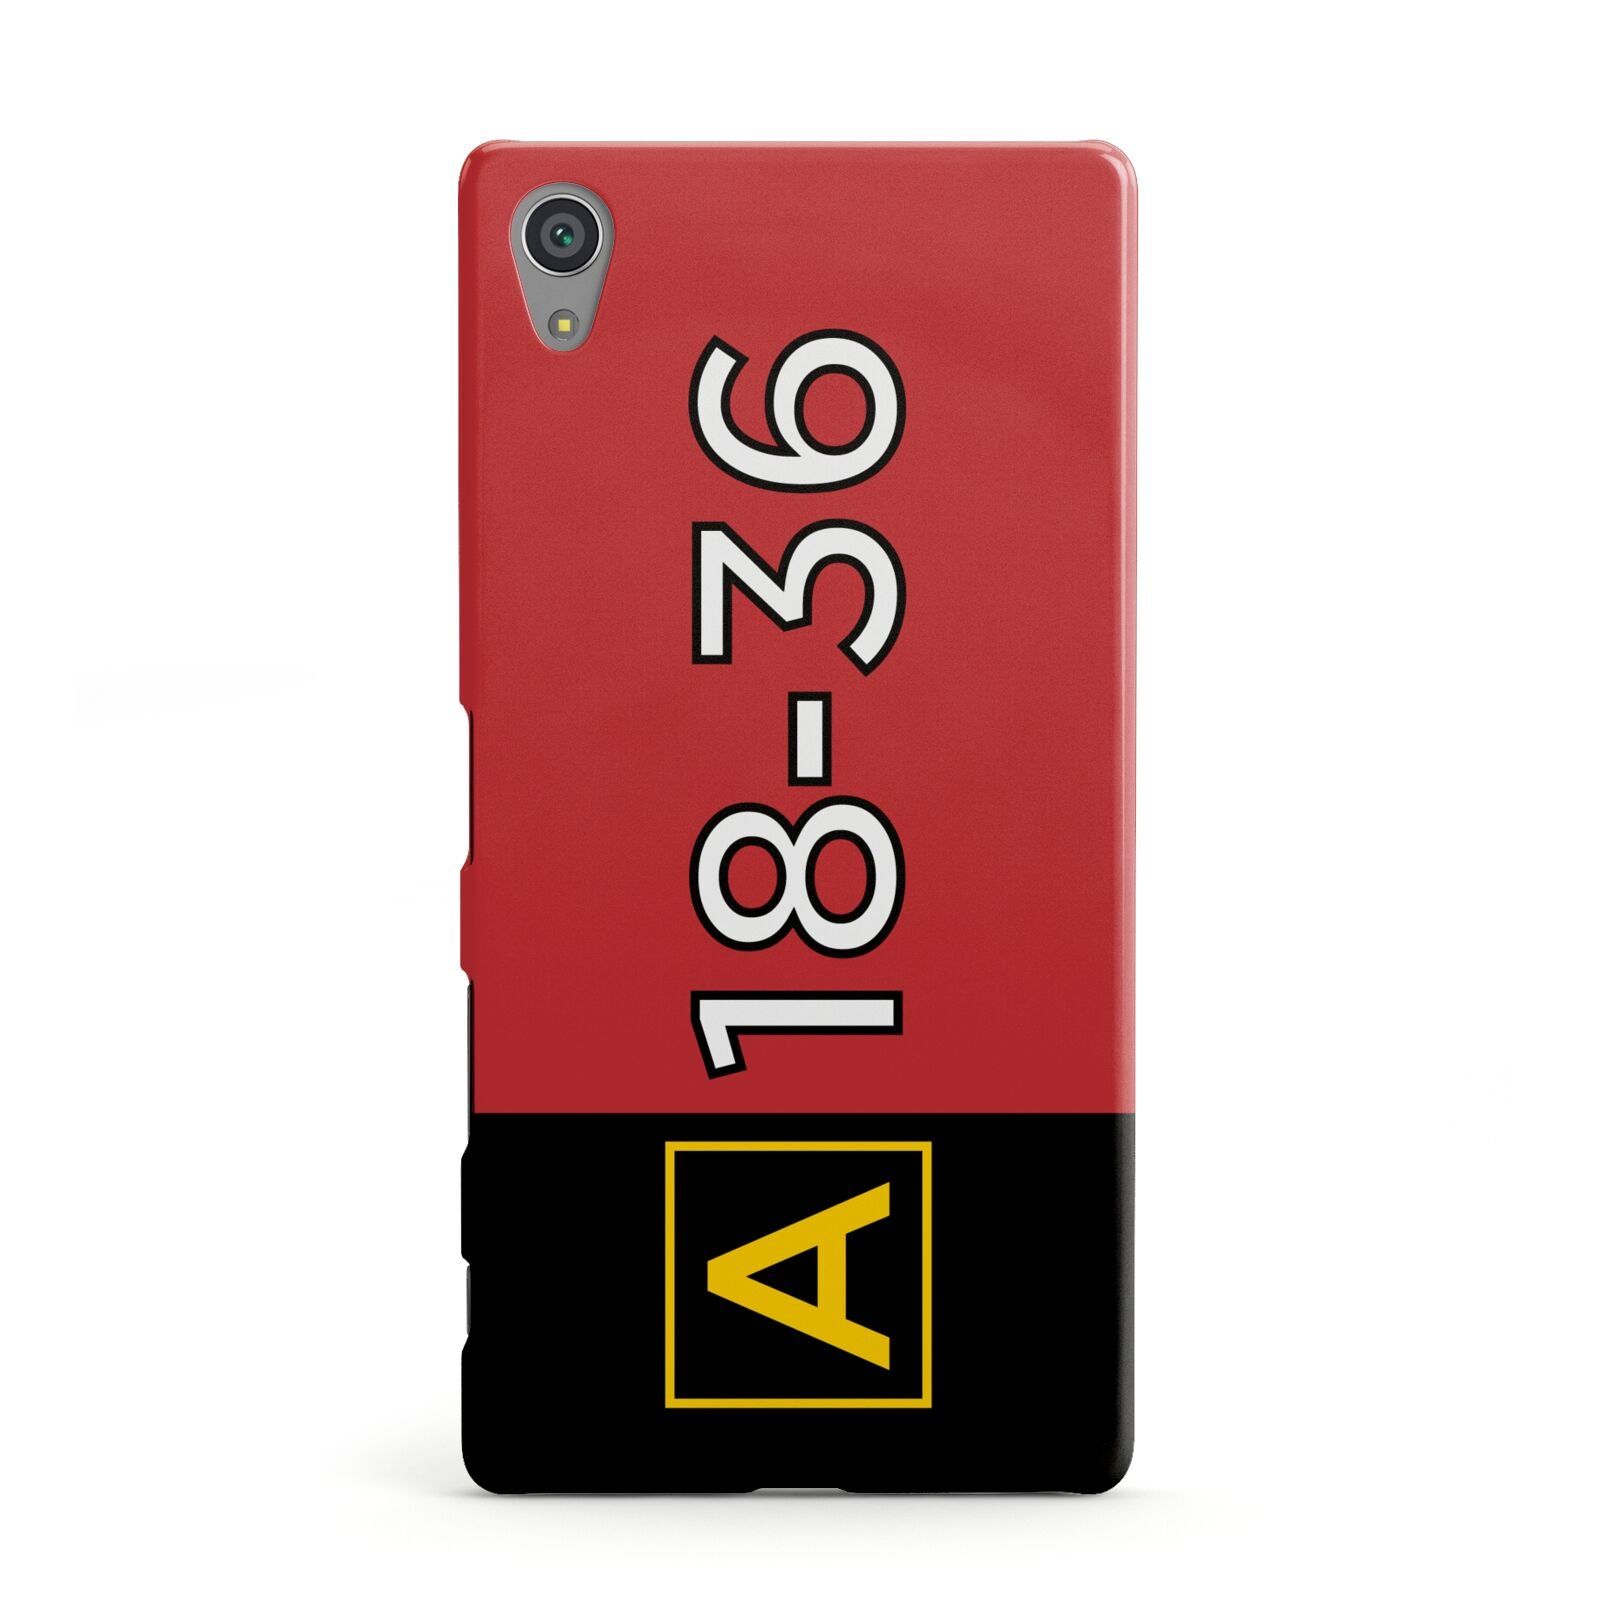 Personalised Runway Holding Position Sony Xperia Case